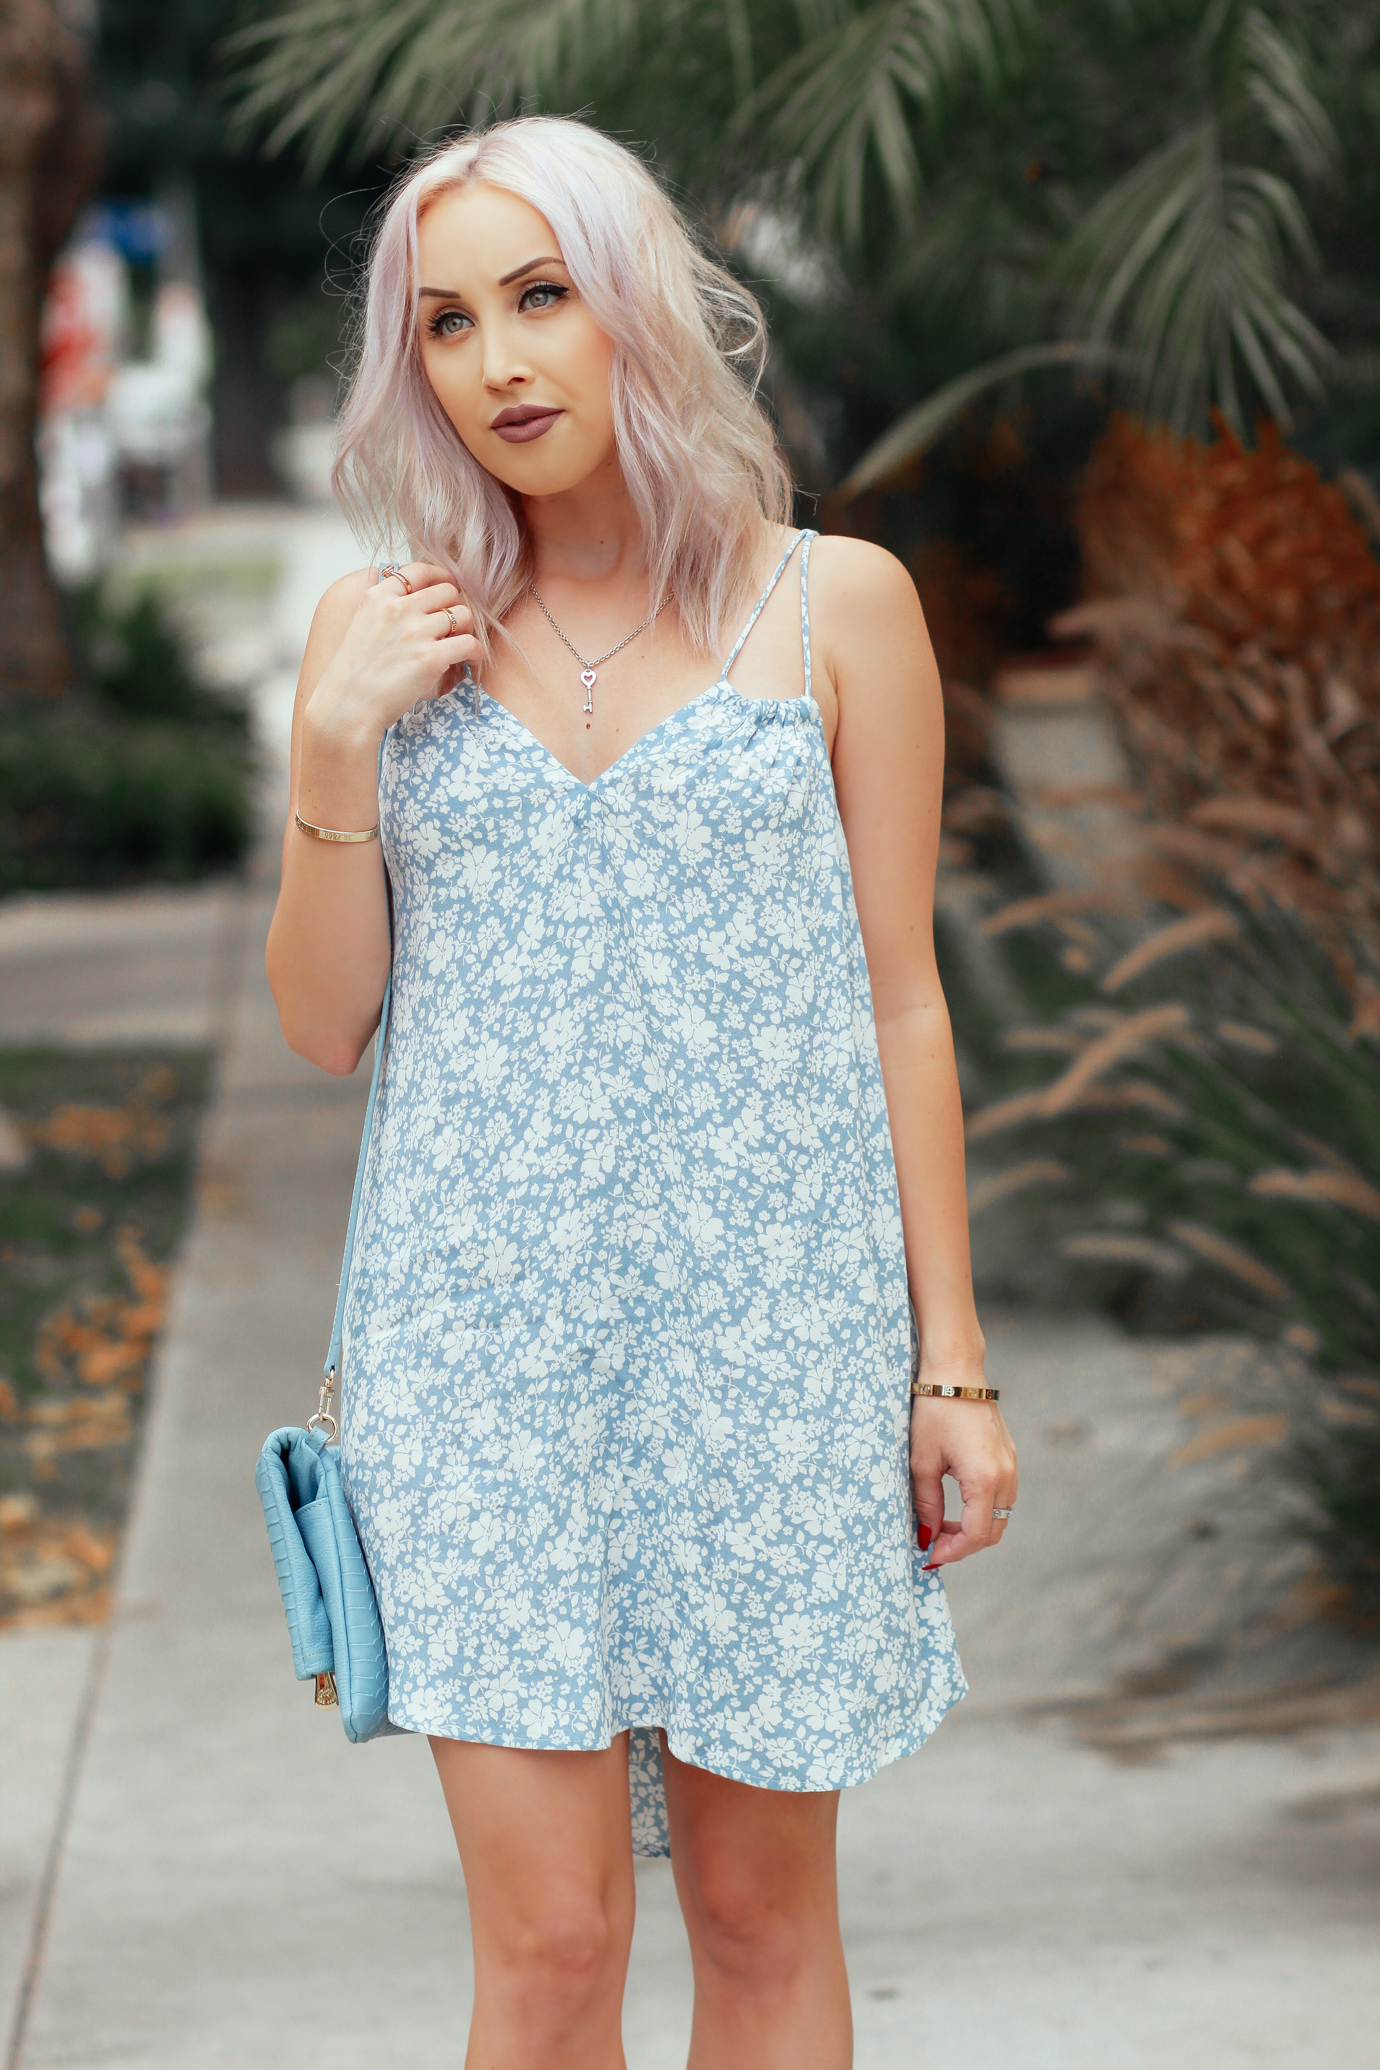 Blondie in the City | The Perfect Summer Dress | Blue and White Flowy Summer Dress